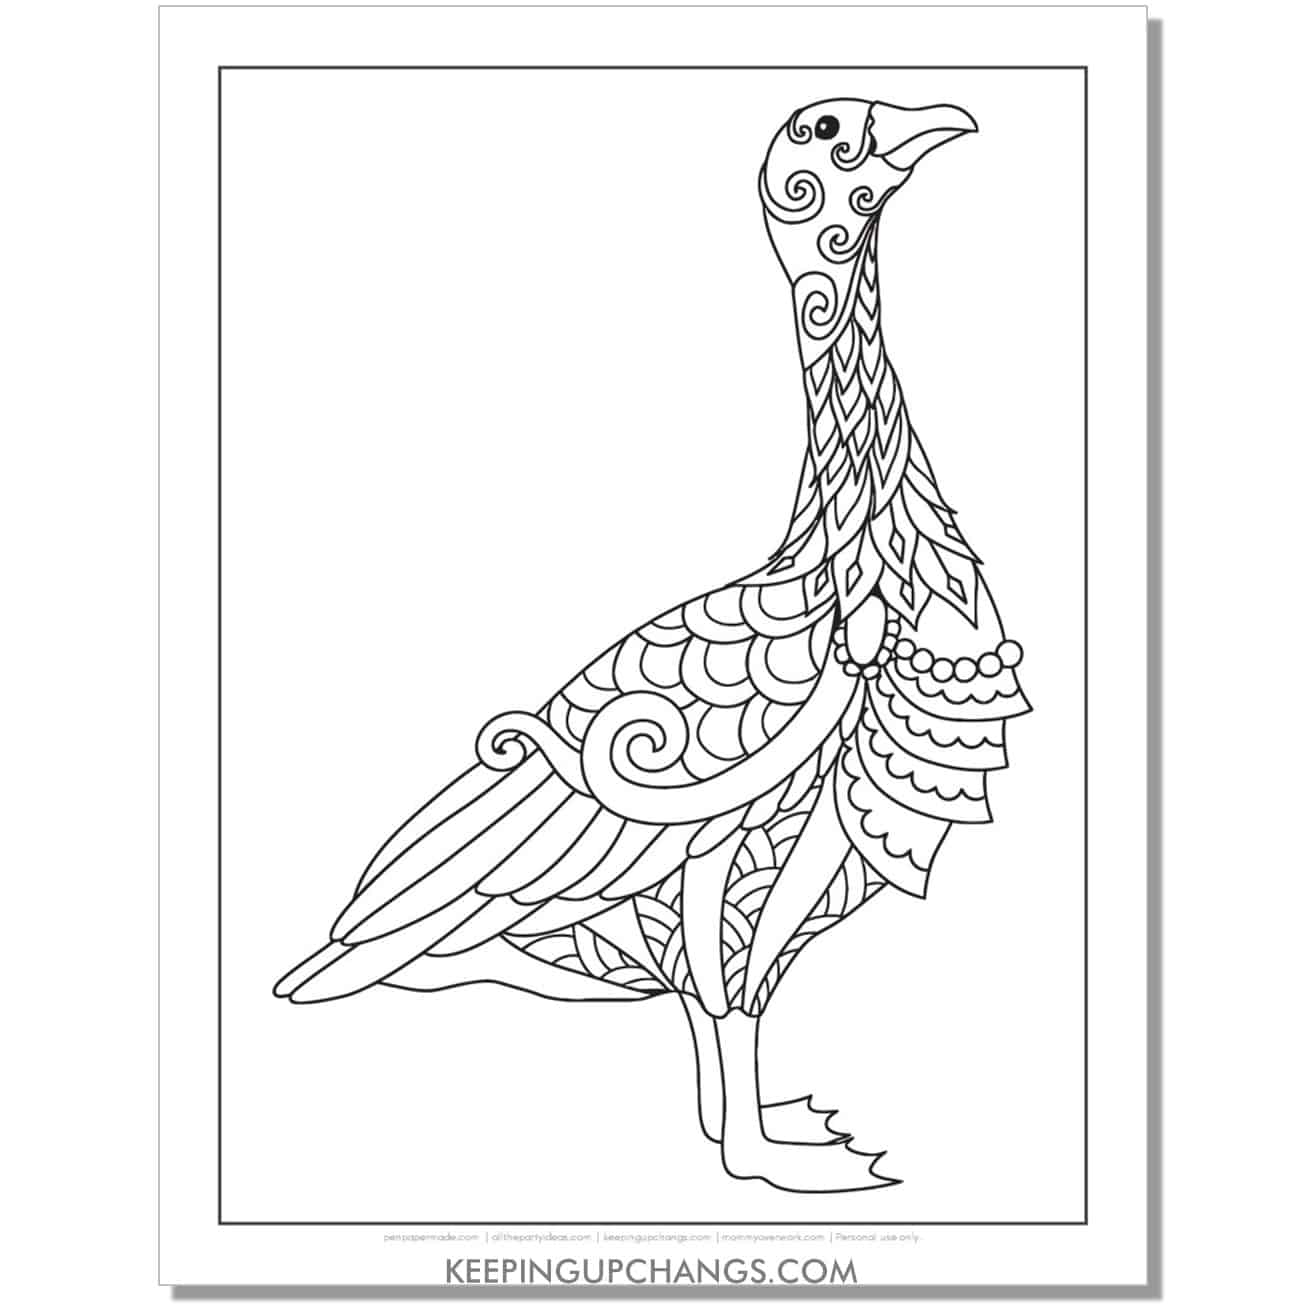 duck or swan coloring page.